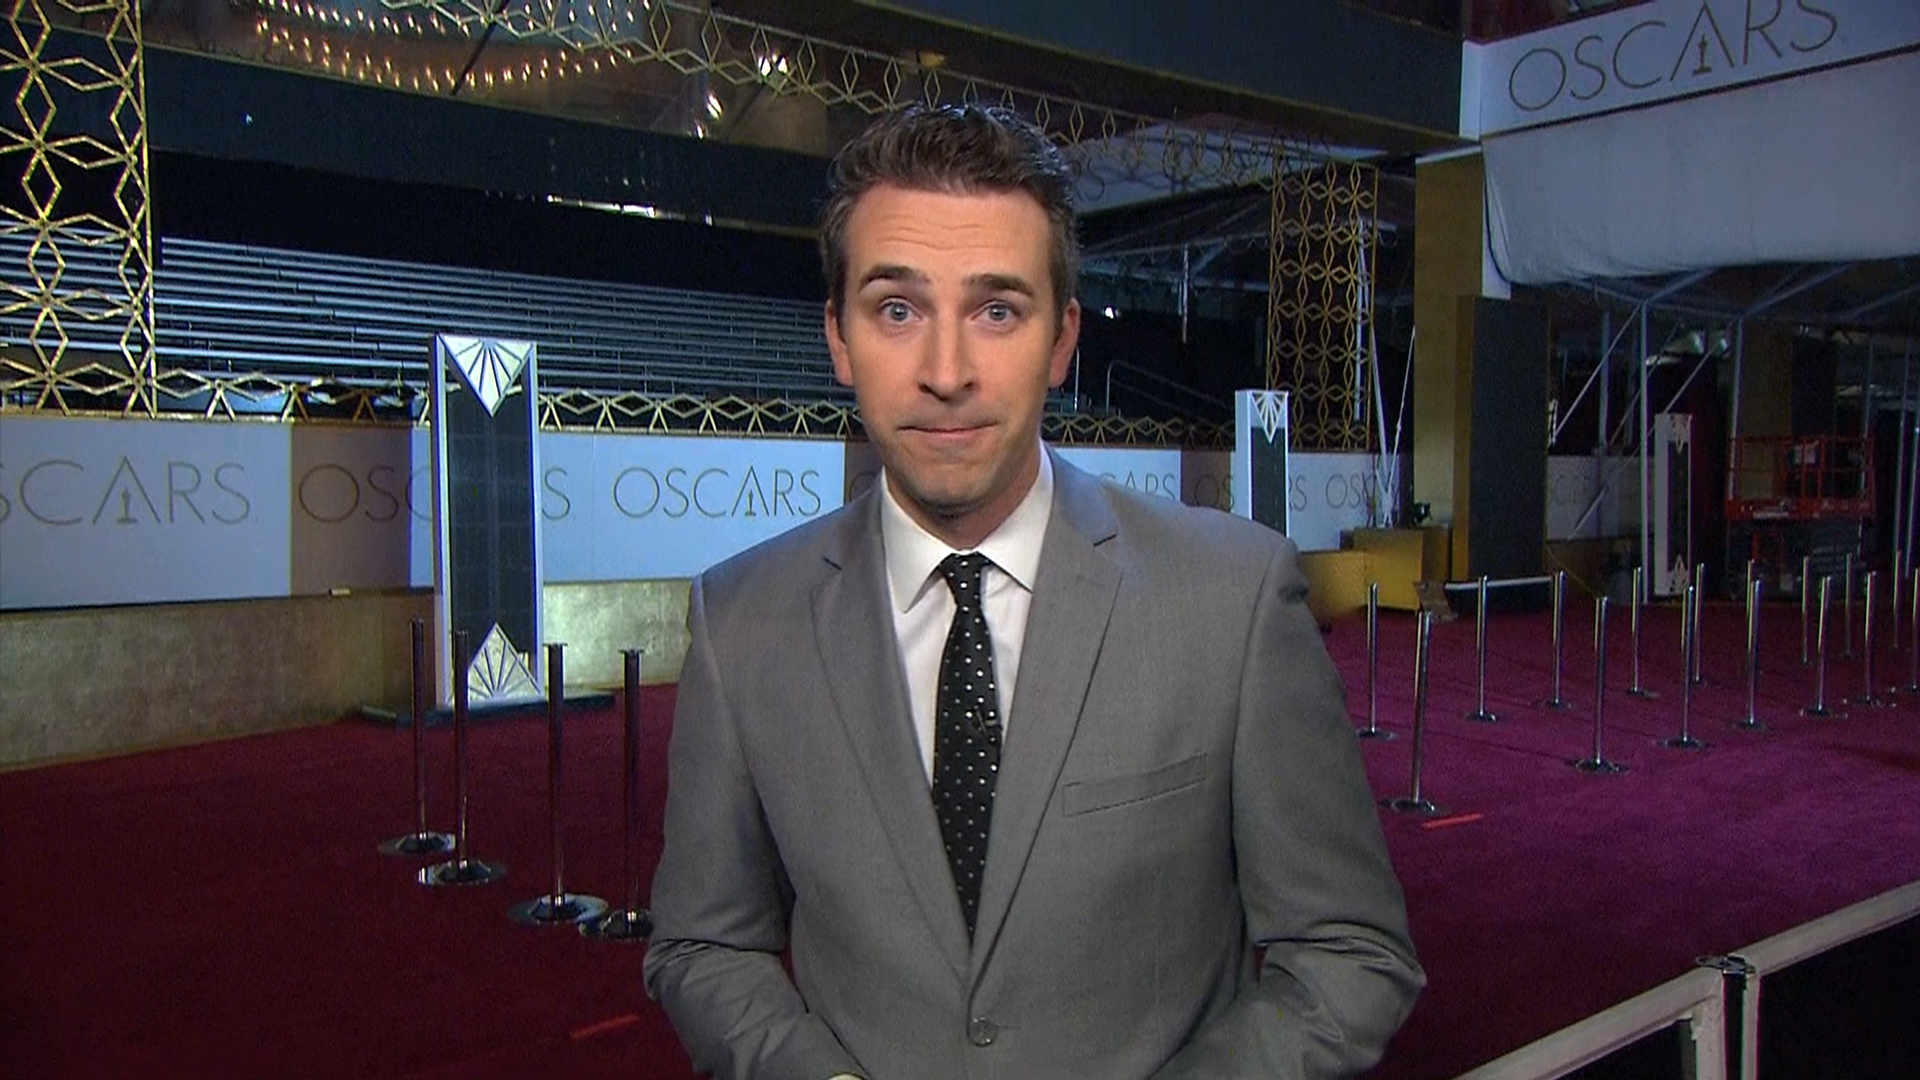 Inside the Oscars: Will previous shows predict tonight’s winners? - TODAY.com